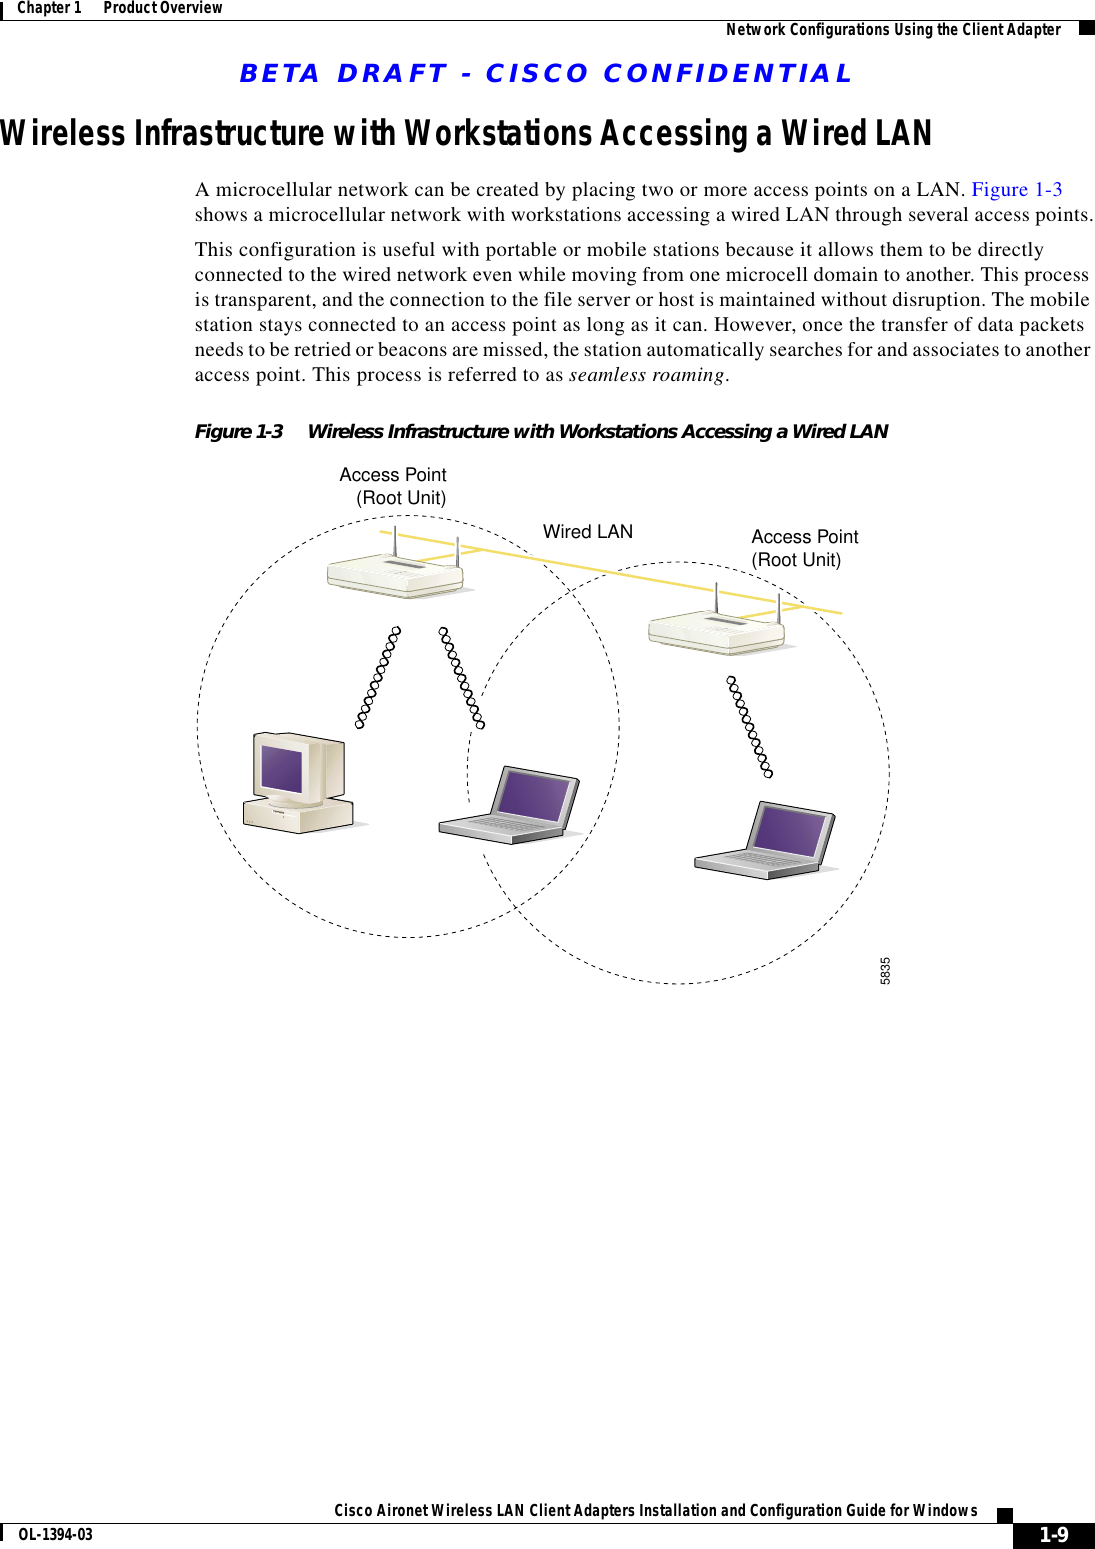 BETA DRAFT - CISCO CONFIDENTIAL1-9Cisco Aironet Wireless LAN Client Adapters Installation and Configuration Guide for WindowsOL-1394-03Chapter 1      Product Overview Network Configurations Using the Client AdapterWireless Infrastructure with Workstations Accessing a Wired LANA microcellular network can be created by placing two or more access points on a LAN. Figure 1-3 shows a microcellular network with workstations accessing a wired LAN through several access points.This configuration is useful with portable or mobile stations because it allows them to be directly connected to the wired network even while moving from one microcell domain to another. This process is transparent, and the connection to the file server or host is maintained without disruption. The mobile station stays connected to an access point as long as it can. However, once the transfer of data packets needs to be retried or beacons are missed, the station automatically searches for and associates to another access point. This process is referred to as seamless roaming.Figure 1-3 Wireless Infrastructure with Workstations Accessing a Wired LANAccess Point(Root Unit)Access Point(Root Unit)5835Wired LAN